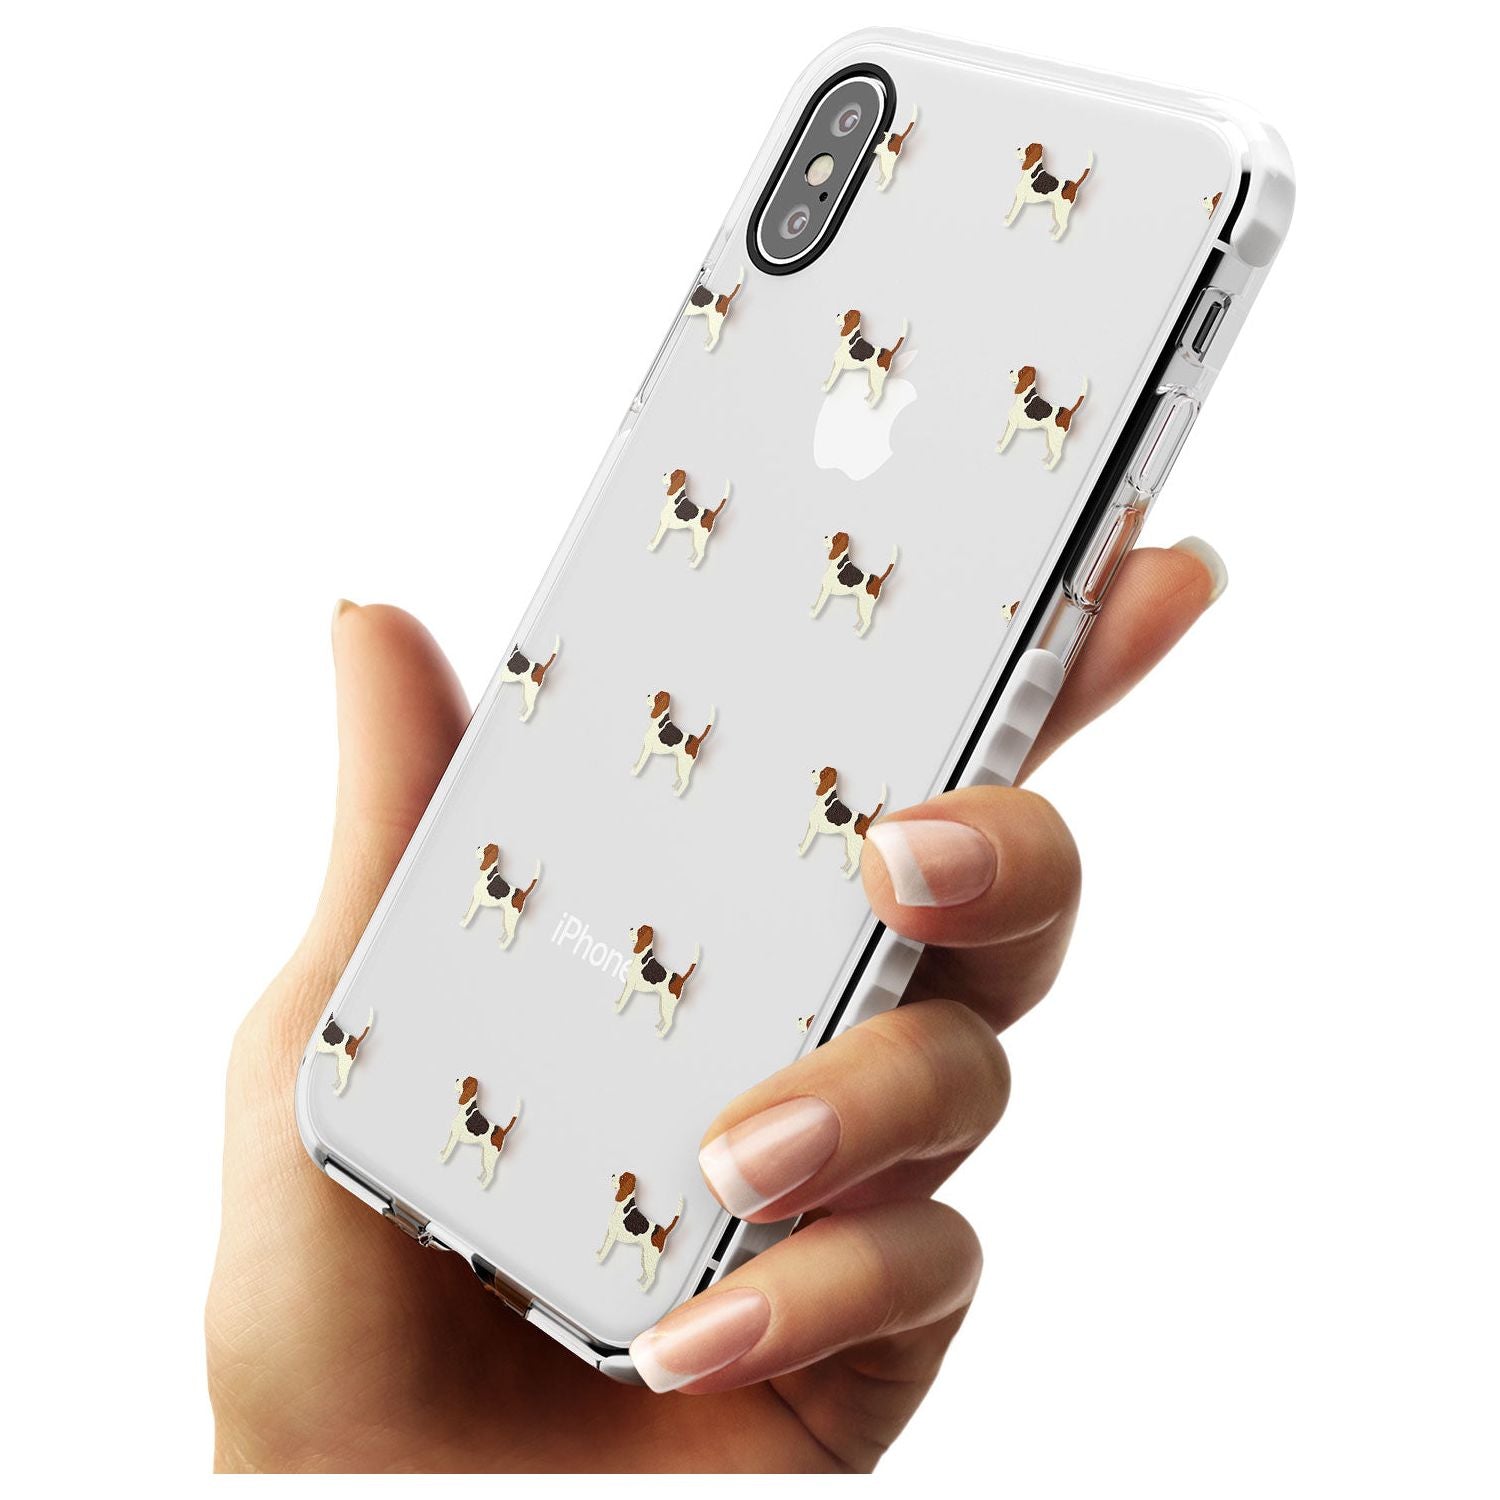 Beagle Dog Pattern Clear Impact Phone Case for iPhone X XS Max XR